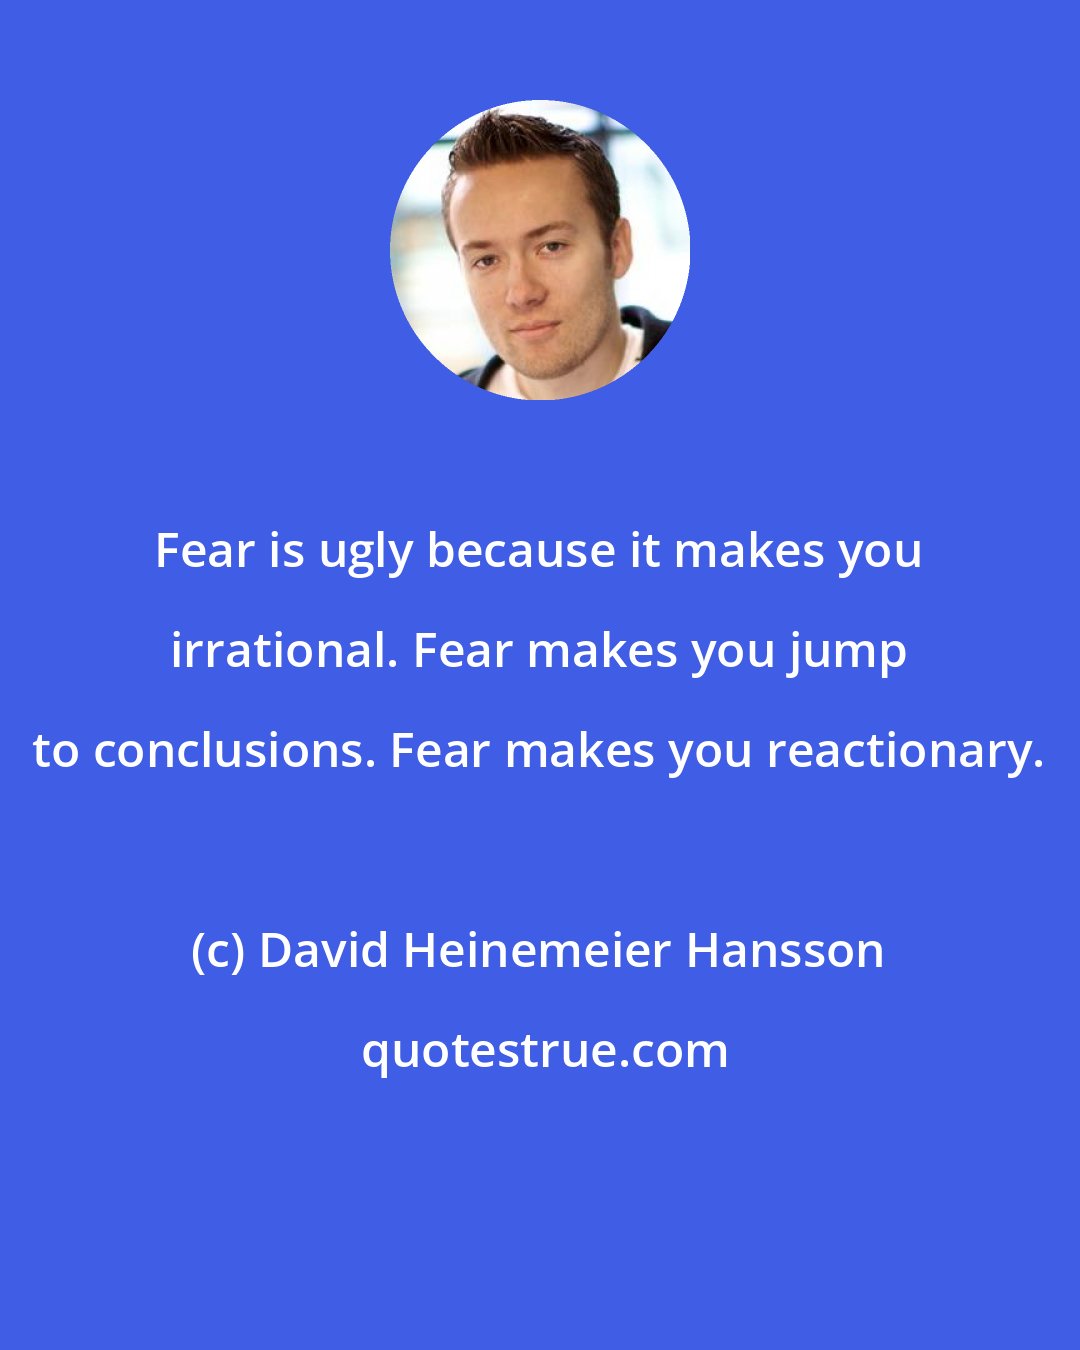 David Heinemeier Hansson: Fear is ugly because it makes you irrational. Fear makes you jump to conclusions. Fear makes you reactionary.